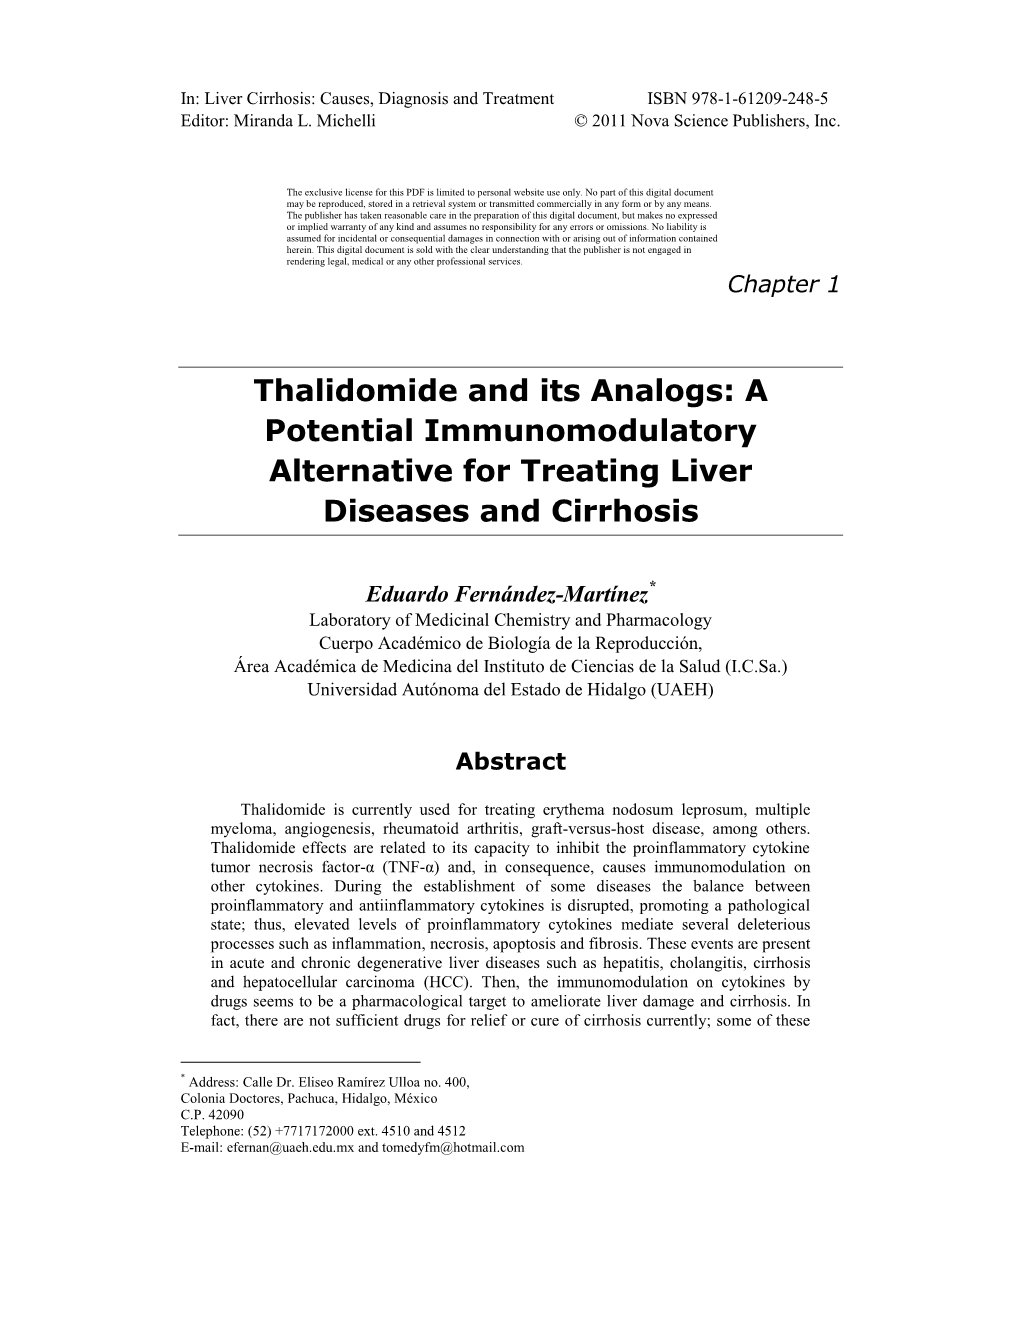 Thalidomide and Its Analogs: a Potential Immunomodulatory Alternative for Treating Liver Diseases and Cirrhosis